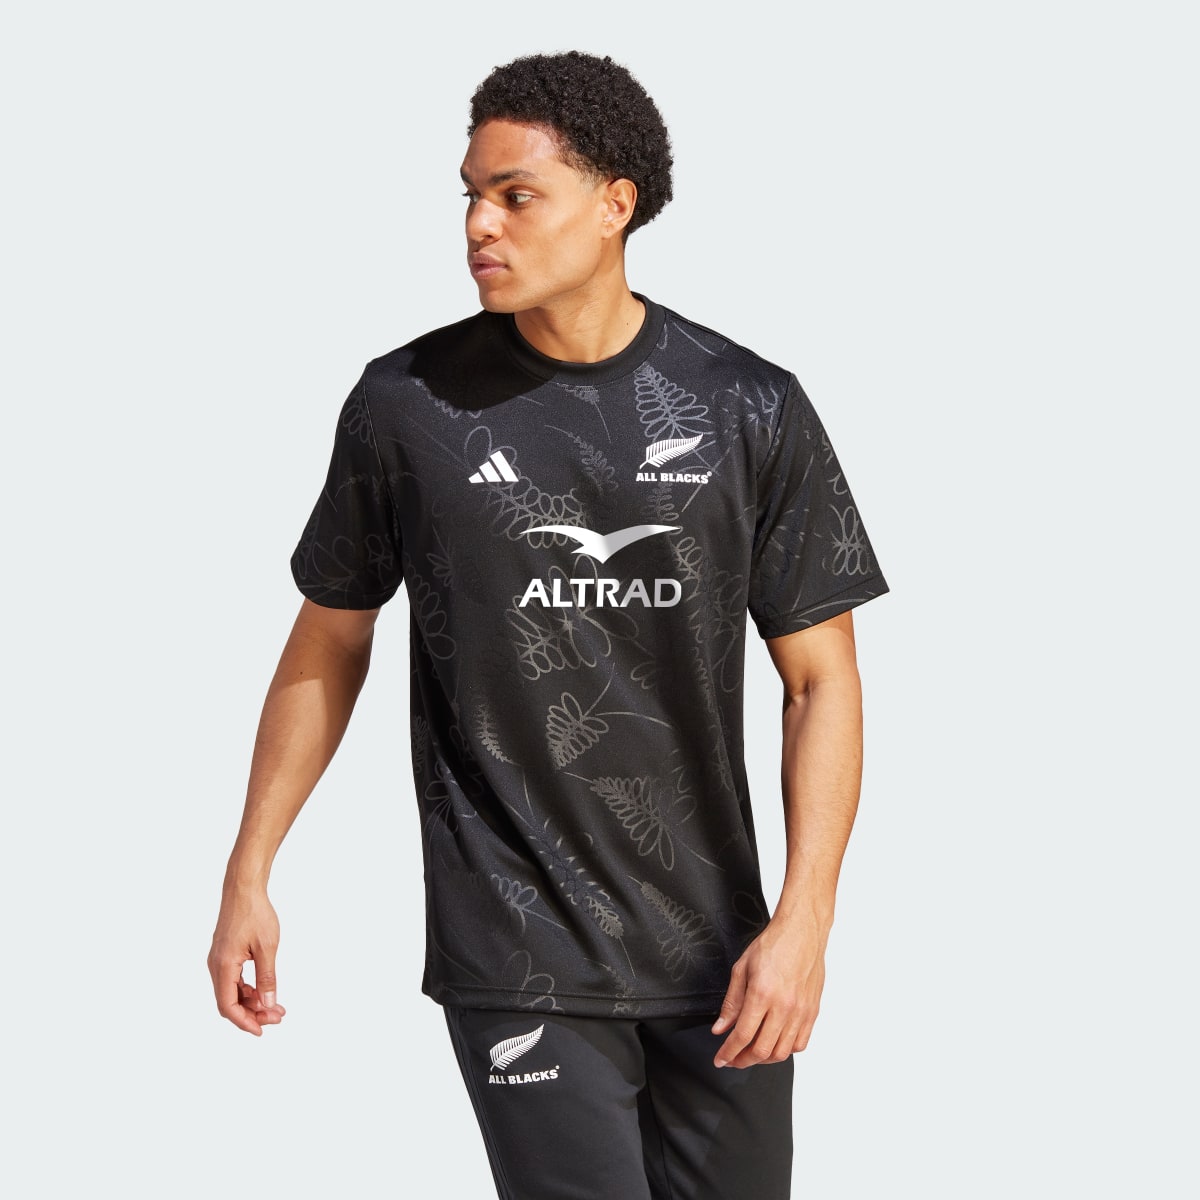 Adidas T-shirt de rugby supporters All Blacks. 4